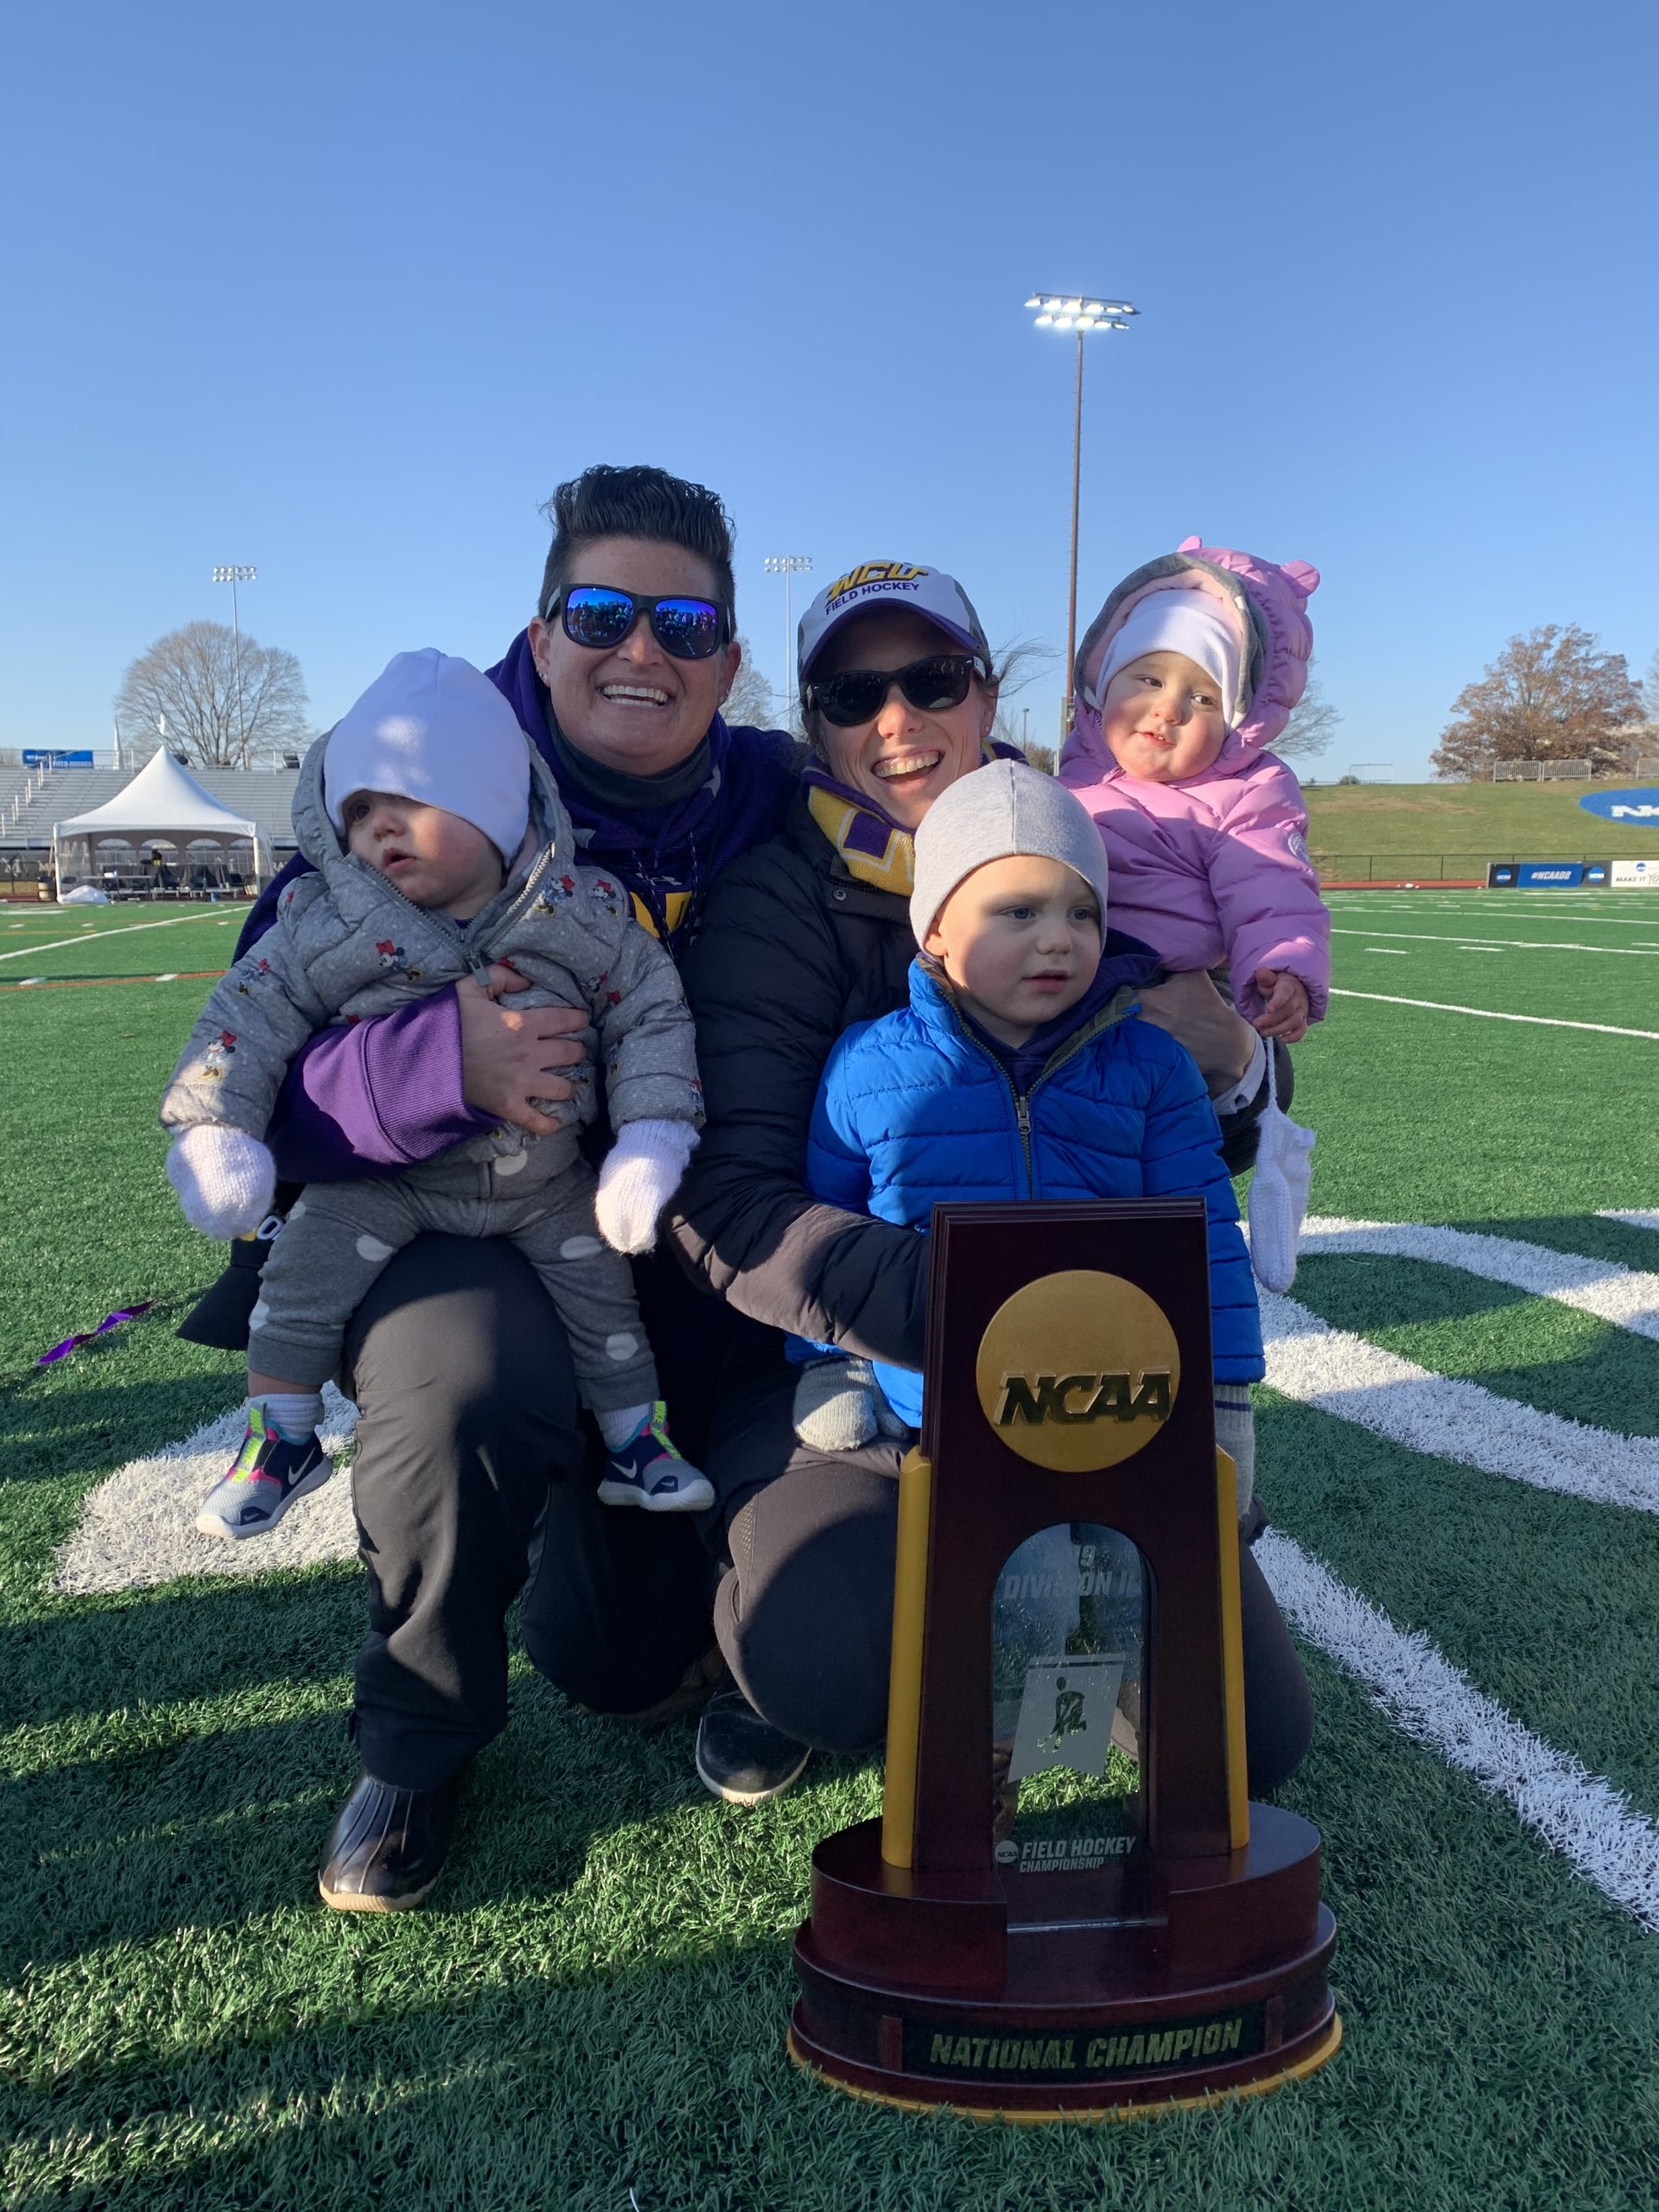 amy cohen with family holding an ncaa trophy